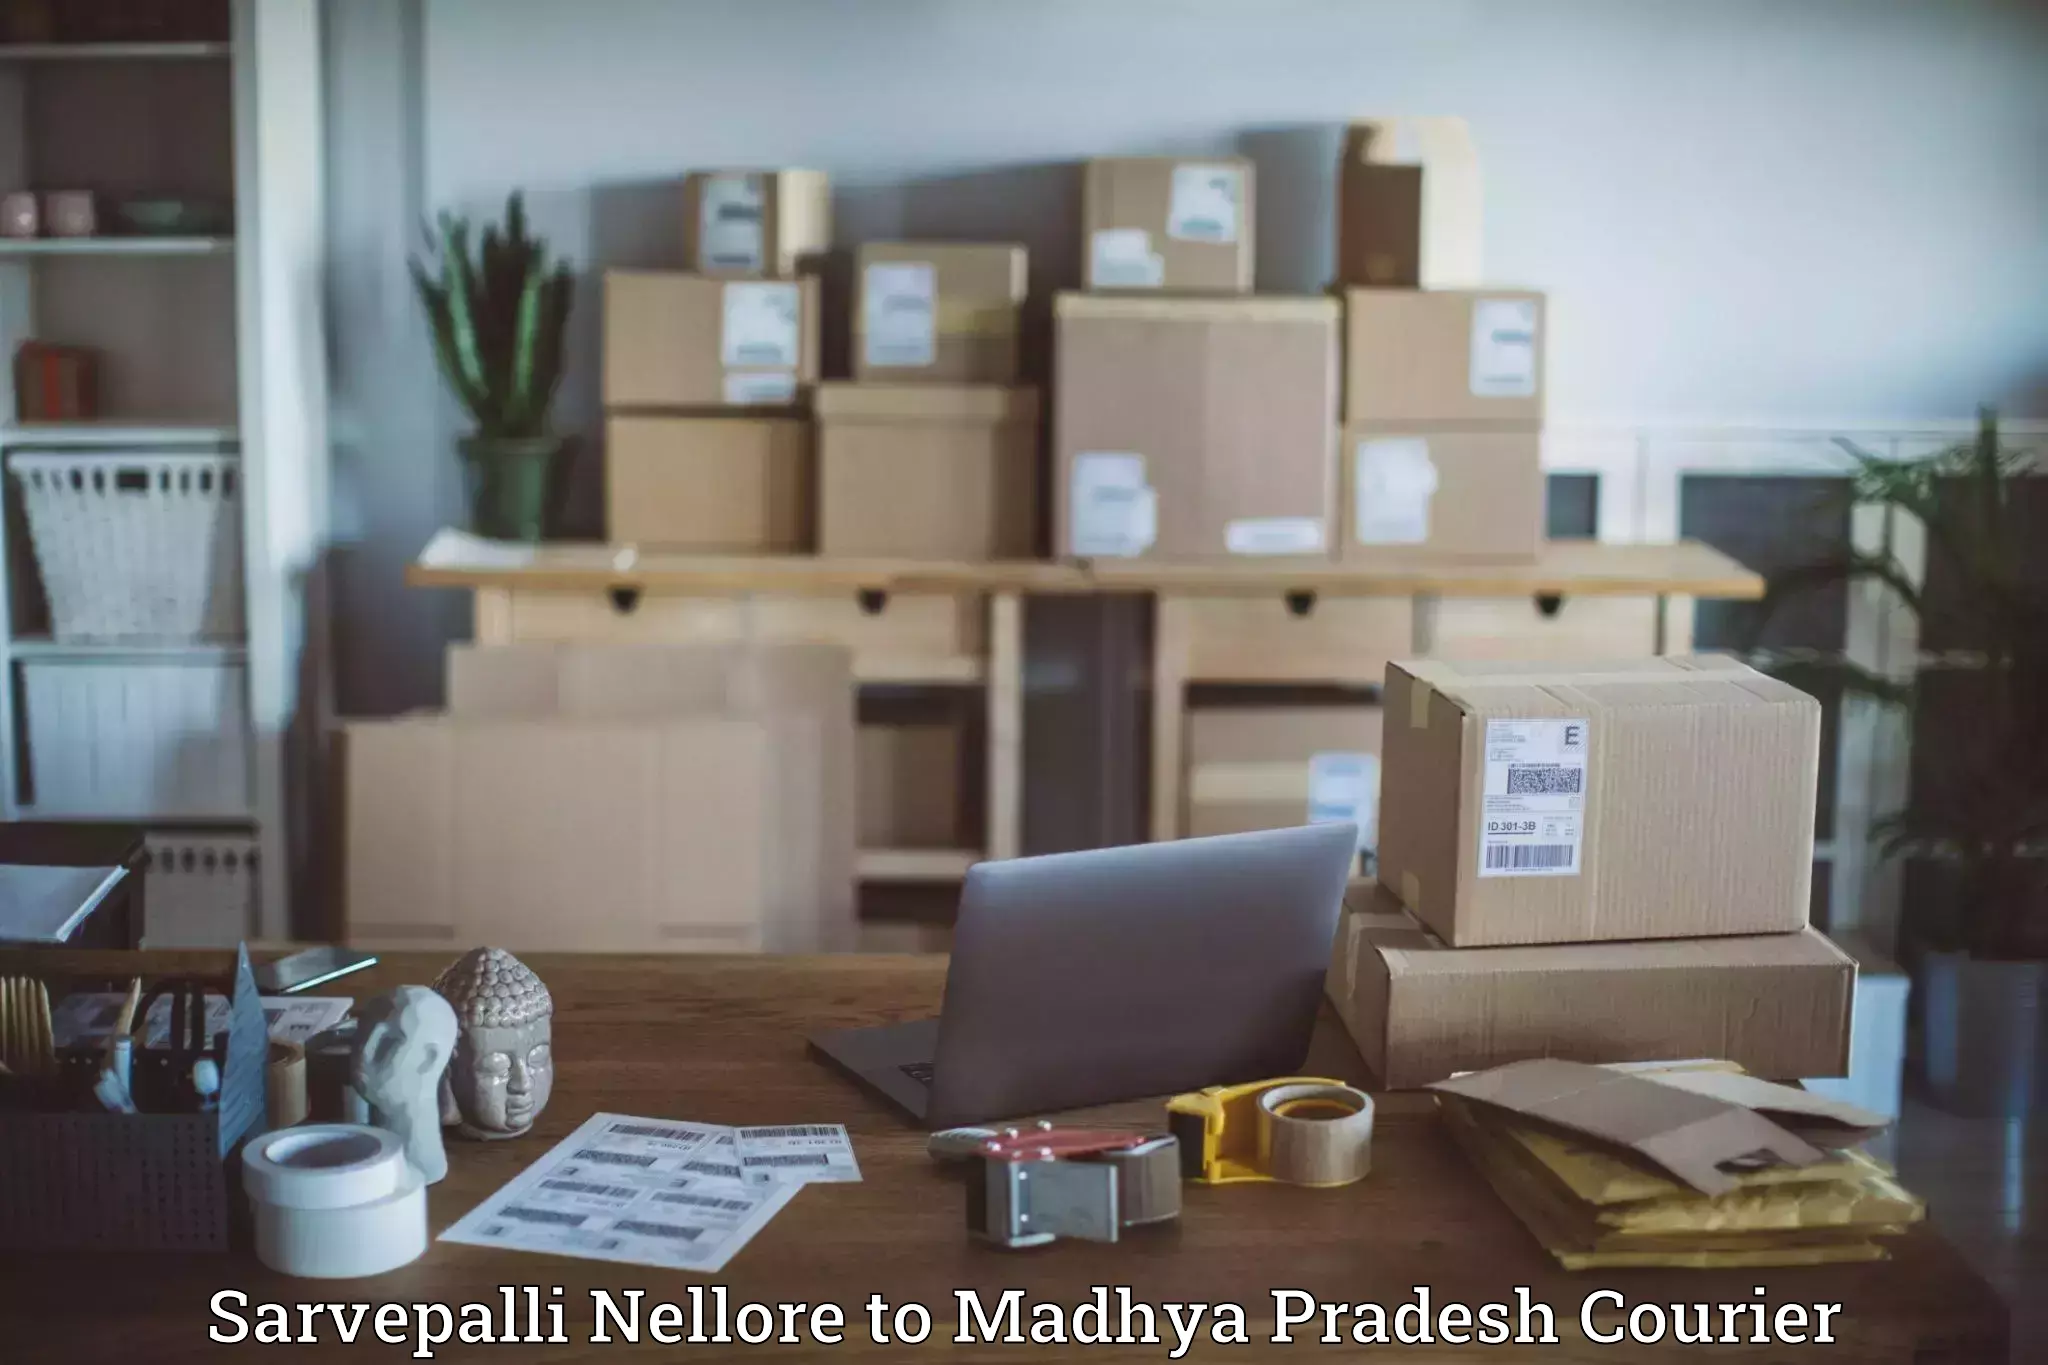 Efficient package consolidation Sarvepalli Nellore to Indore